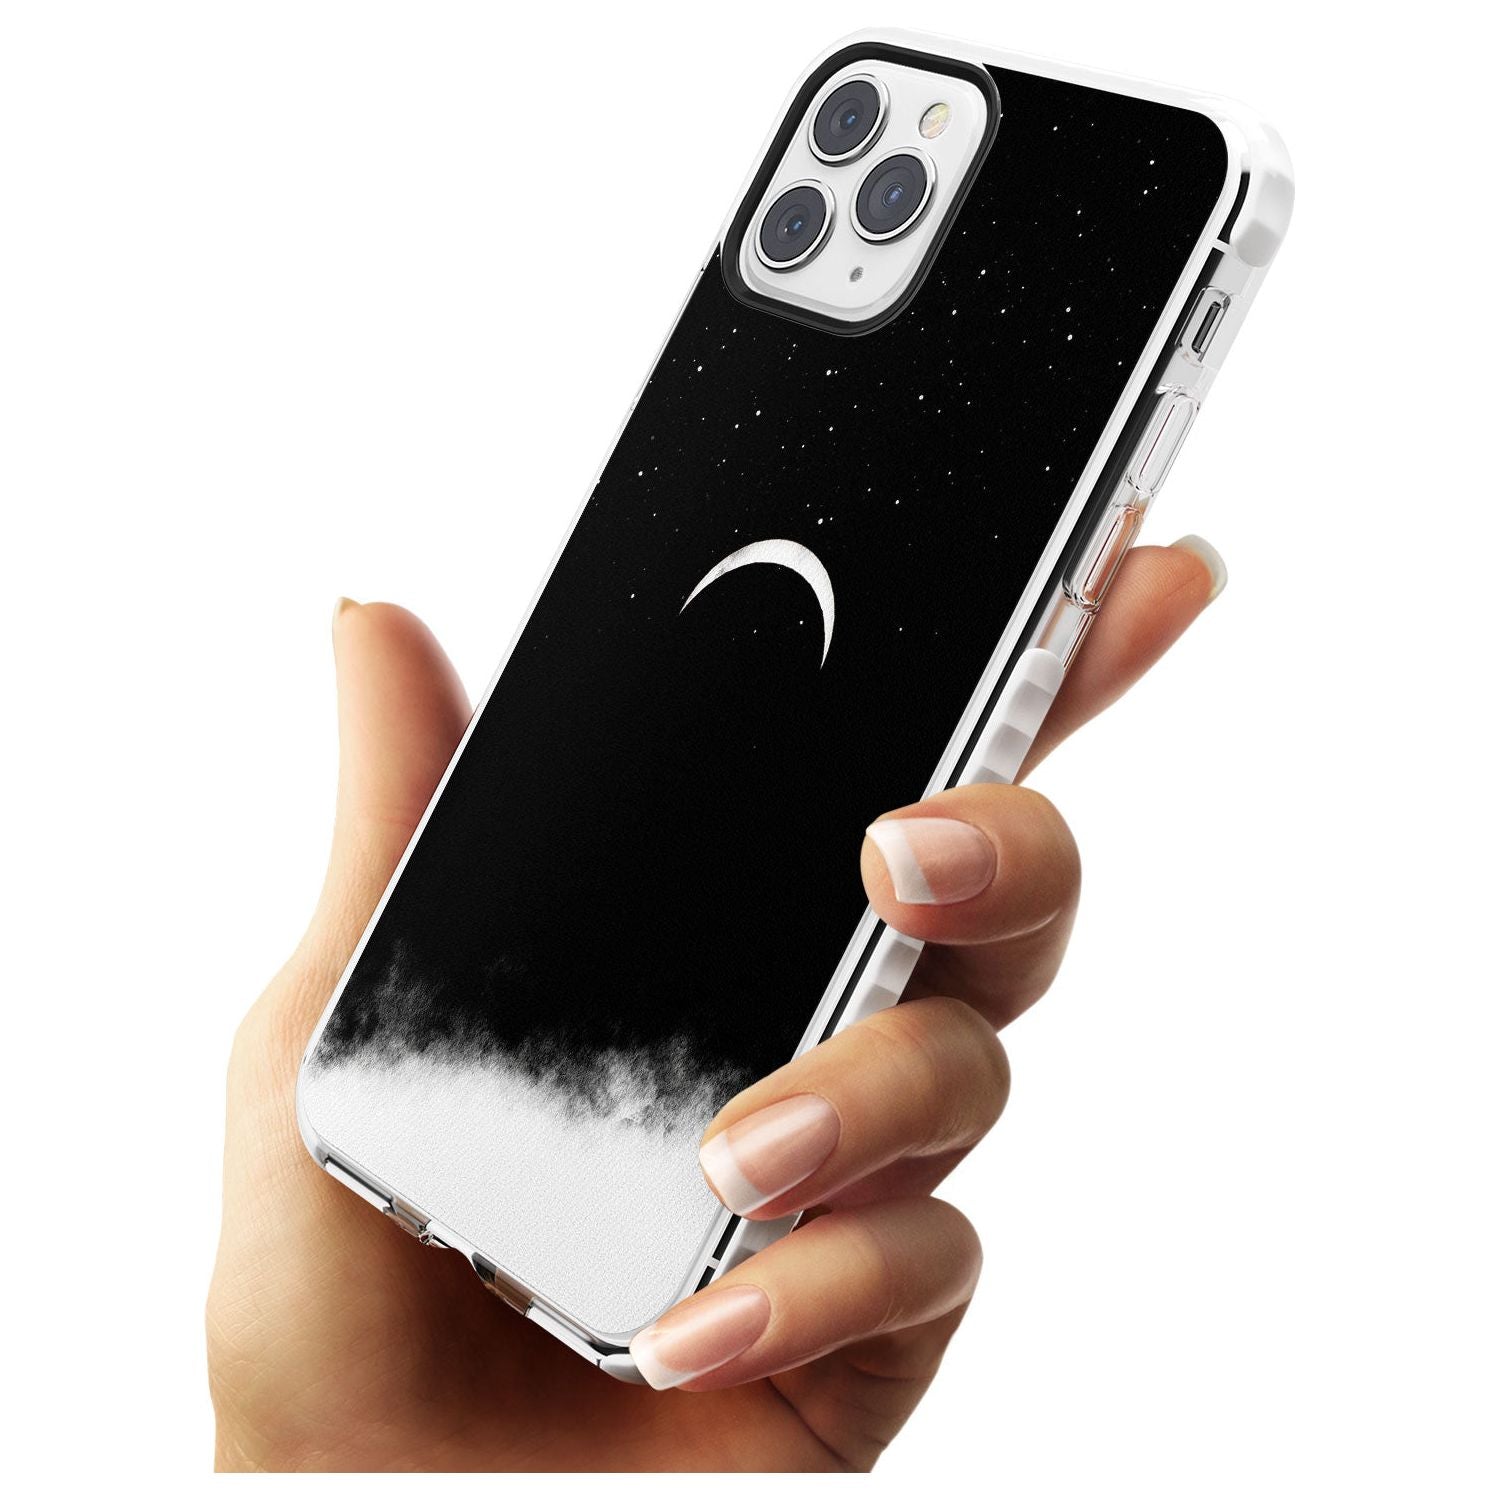 Upside Down Crescent Moon Impact Phone Case for iPhone 11 Pro Max